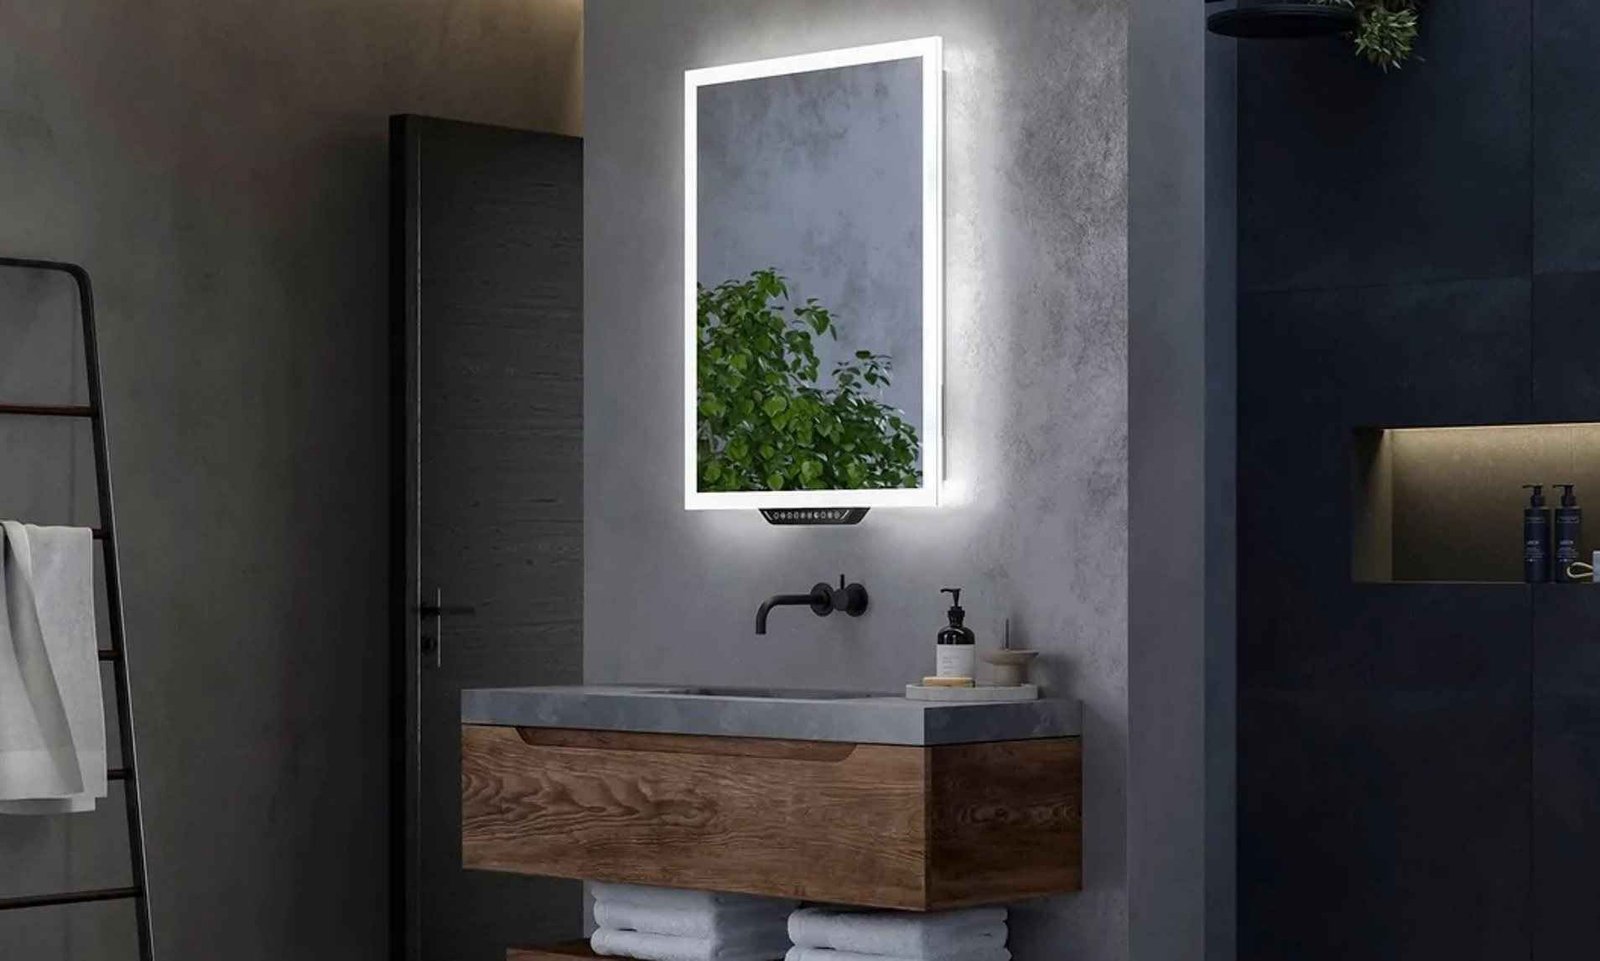 “Smart Mirrors: The Next Level Of Bathroom Technology”